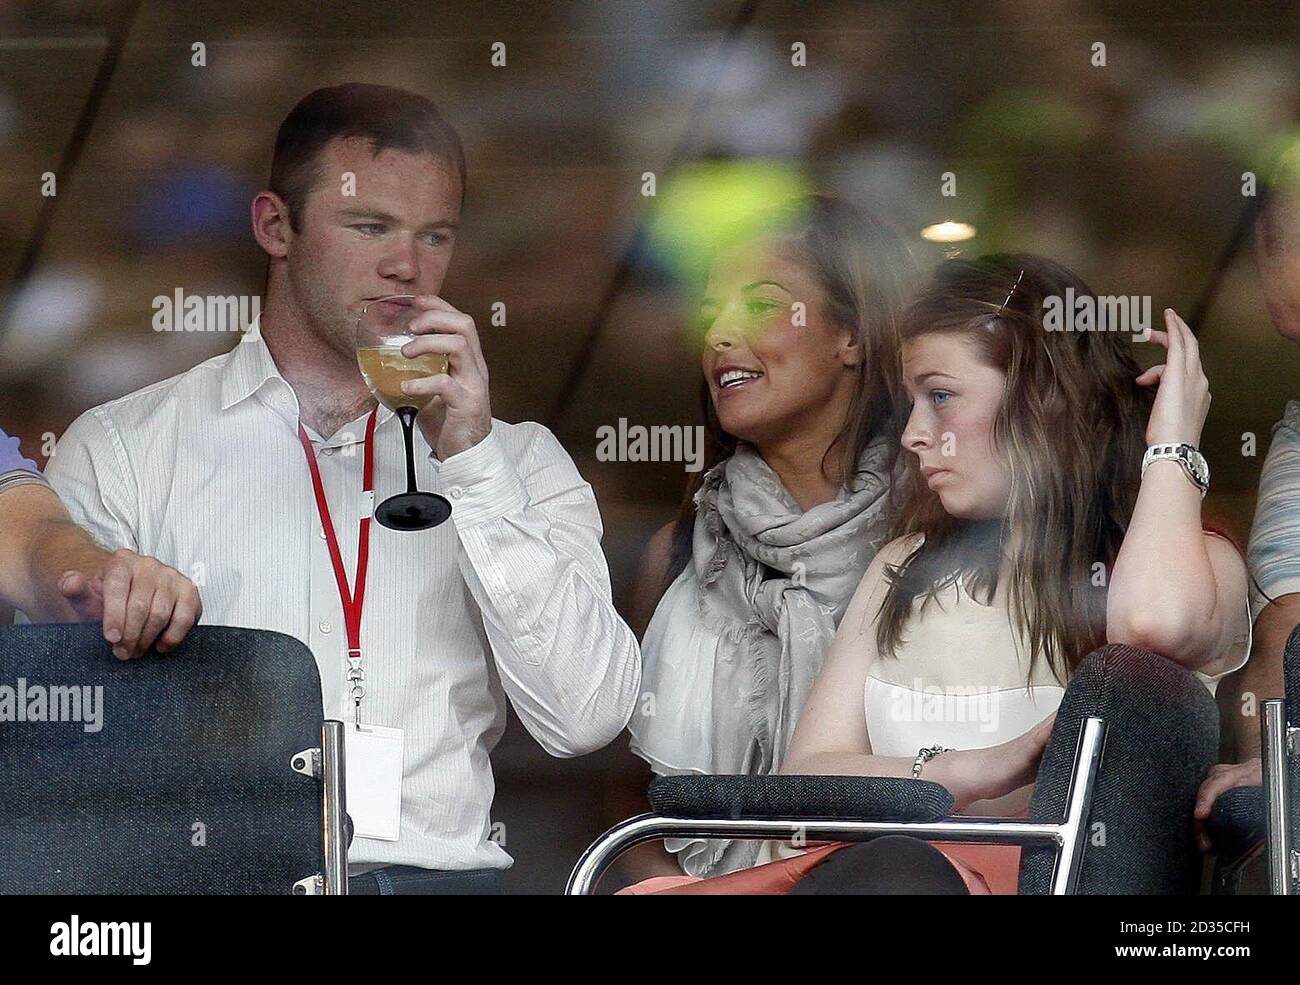 Wayne Rooney and Coleen McLoughlin (second right) at Anfield Stadium, Liverpool during the Liverpool Sound Concert as part of the Capital of Culture celebrations. Stock Photo